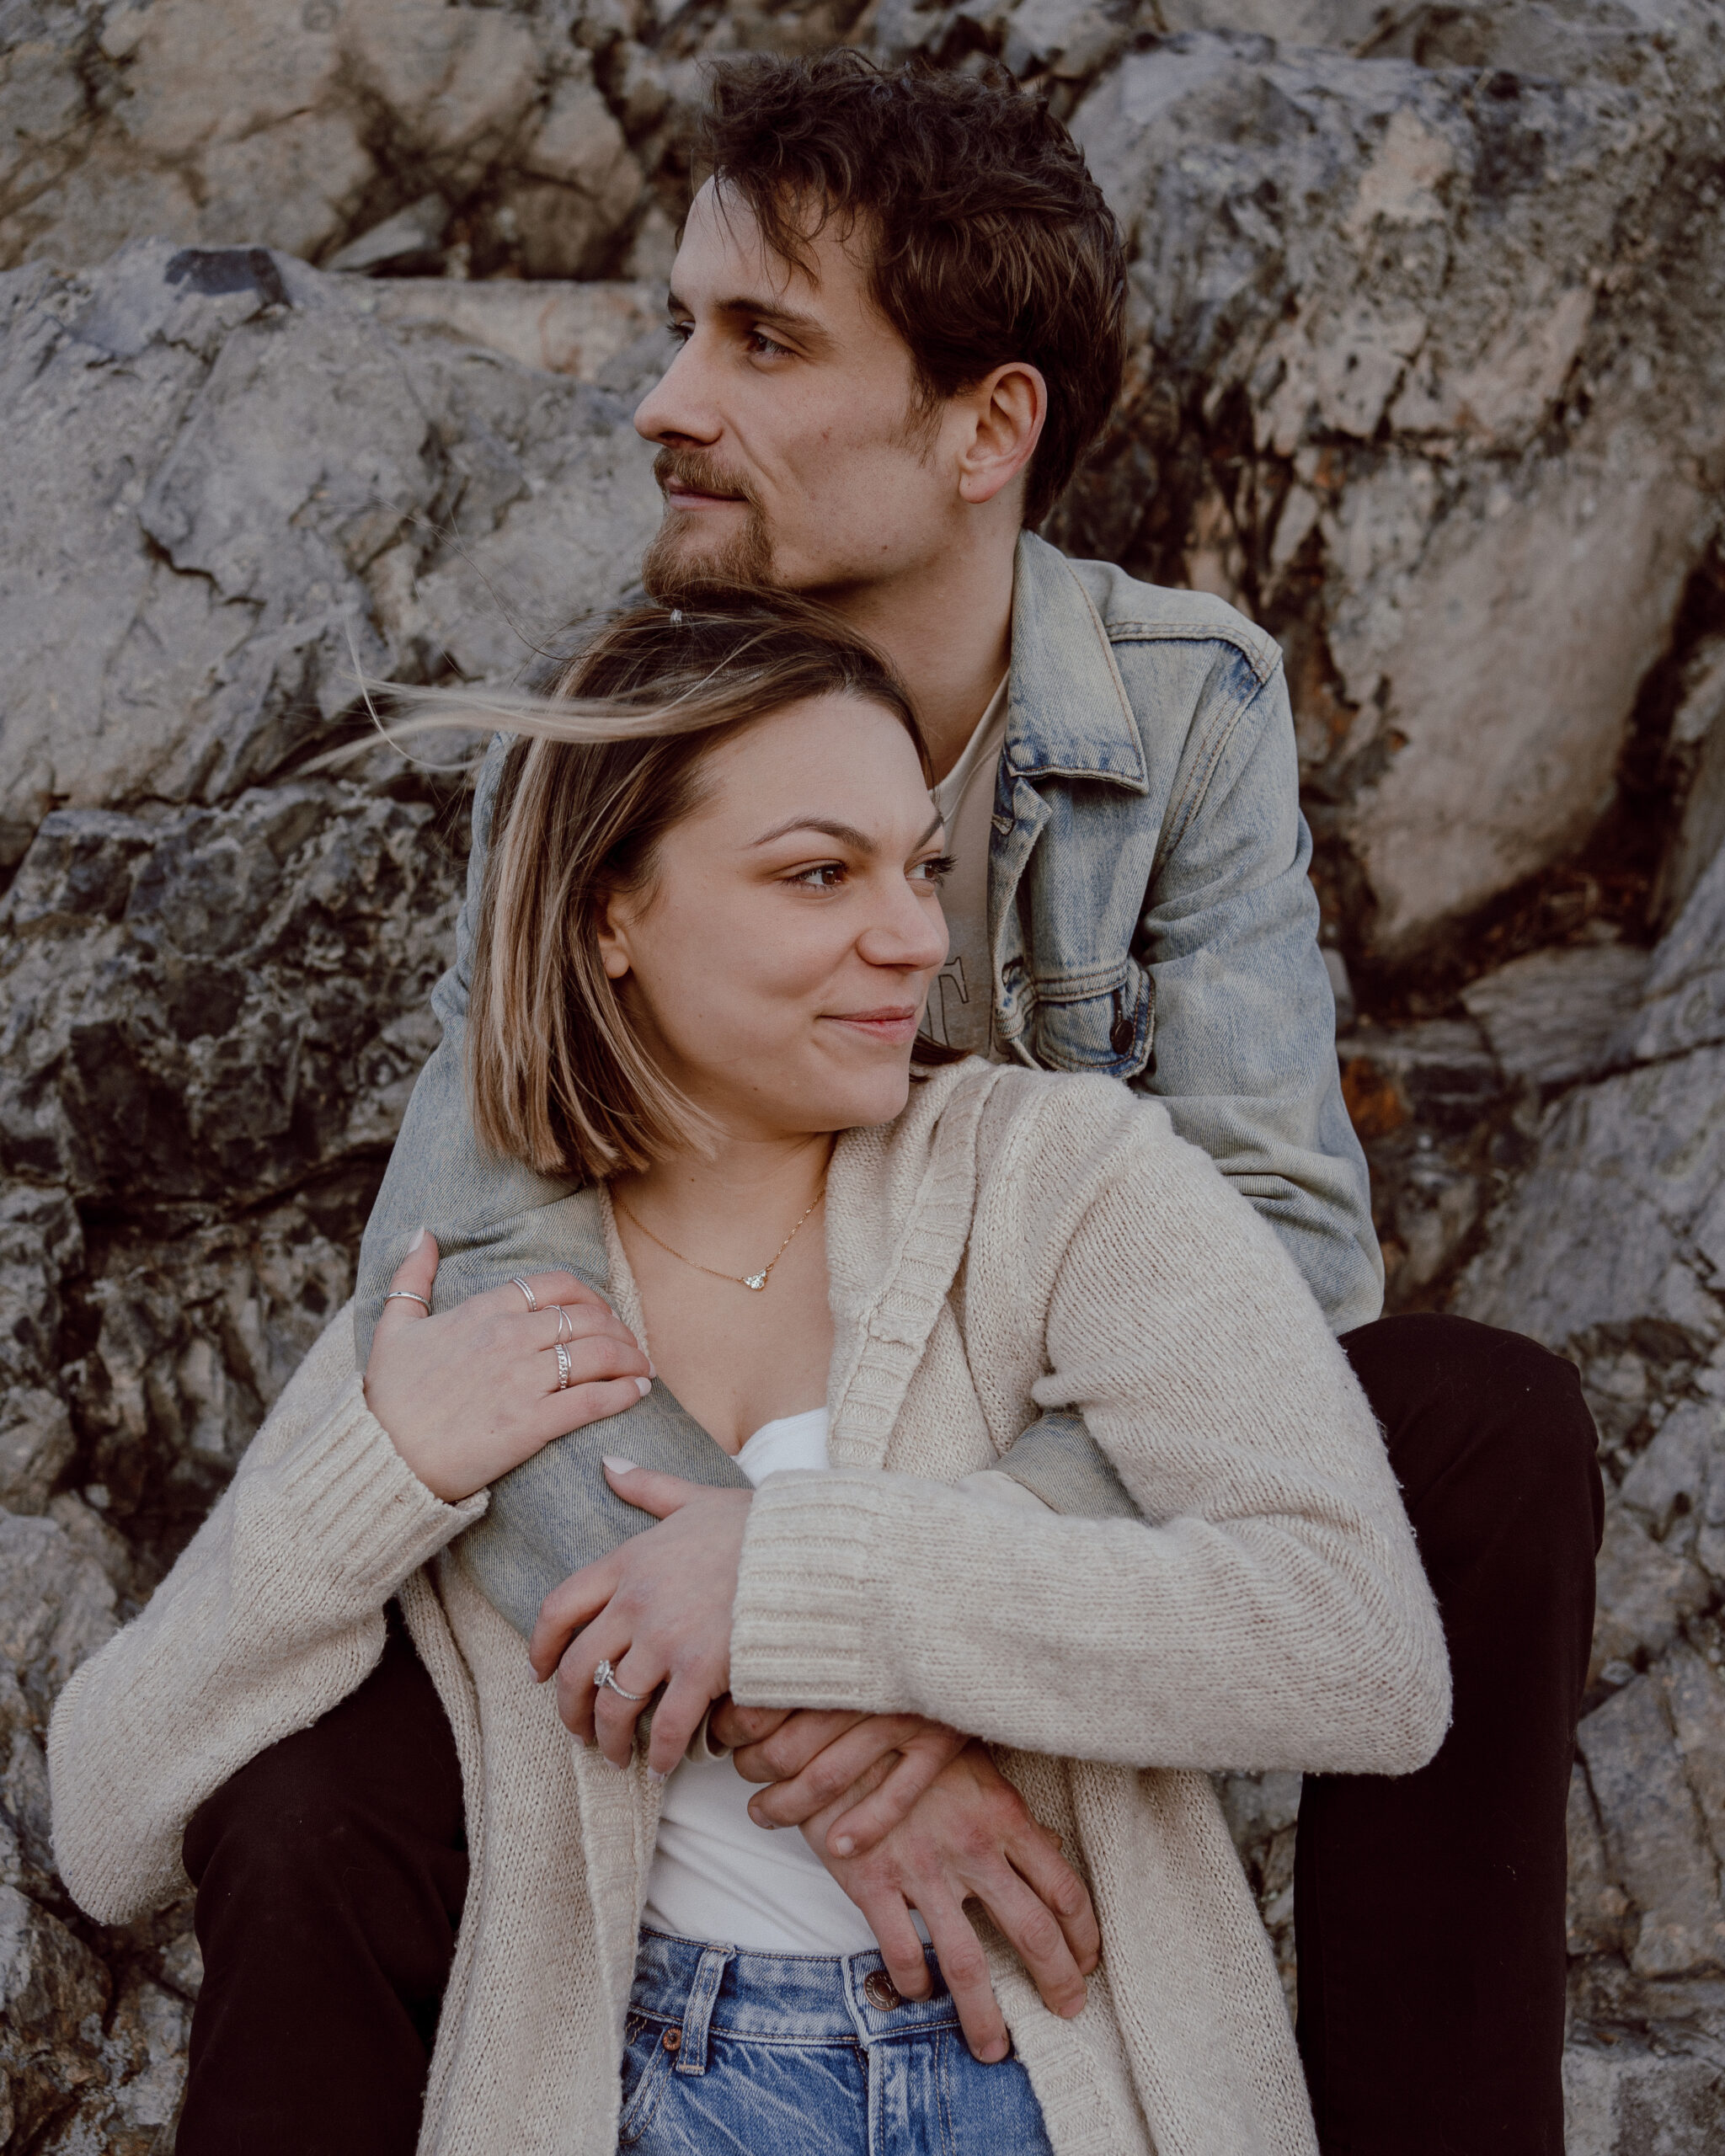 Engaged couple embraces against a rock backdrop, with the woman hugged from behind by her fiancé as they gaze in opposite directions during their engagement photo session at Castle Rock, Marblehead, MA.